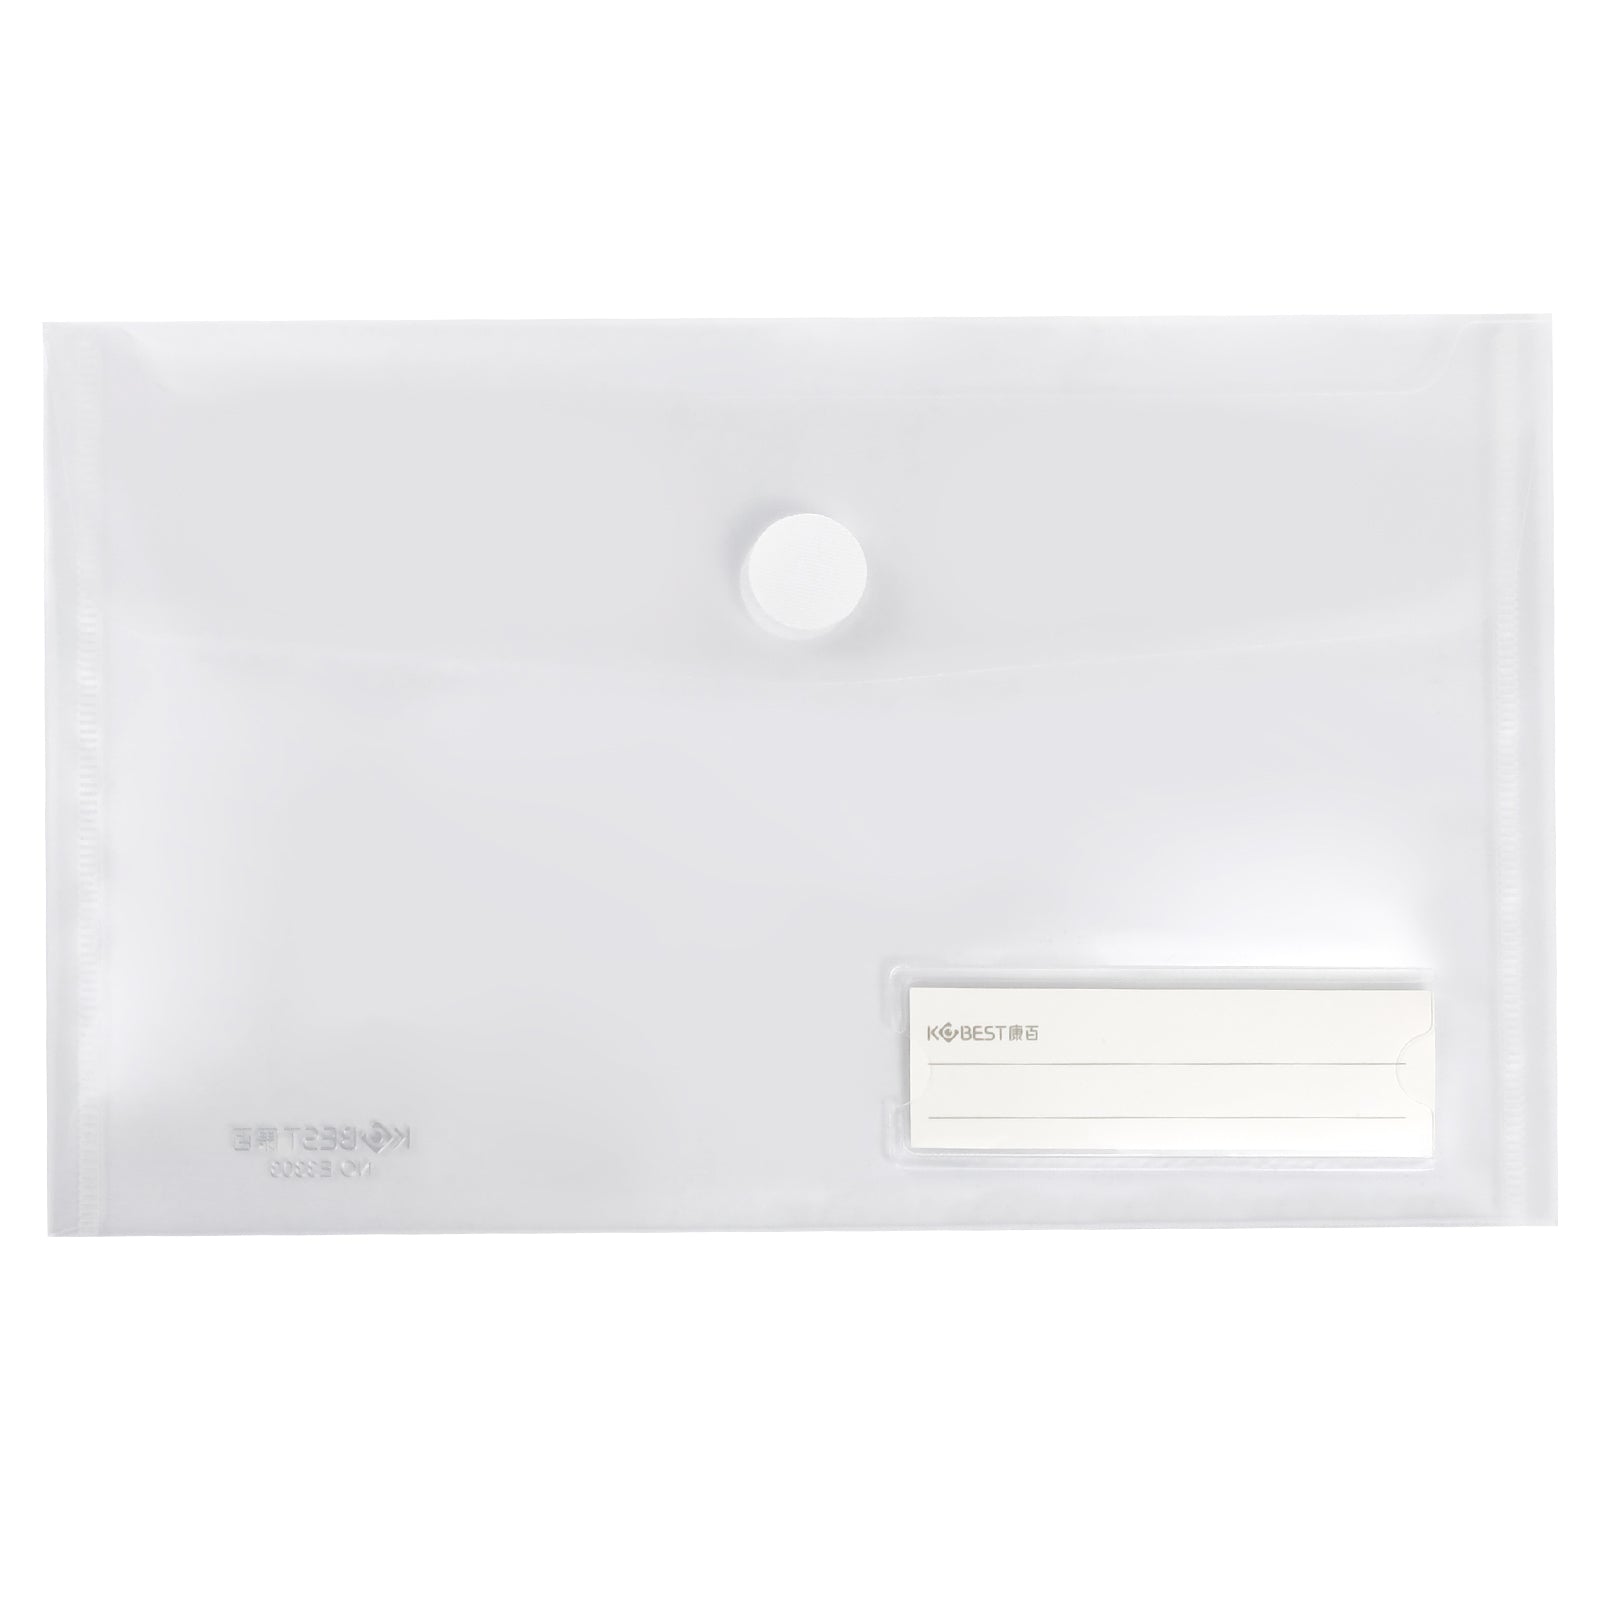 A5 Plastic Clear Envelopes Folder with Hook & Loop Closure 6x10